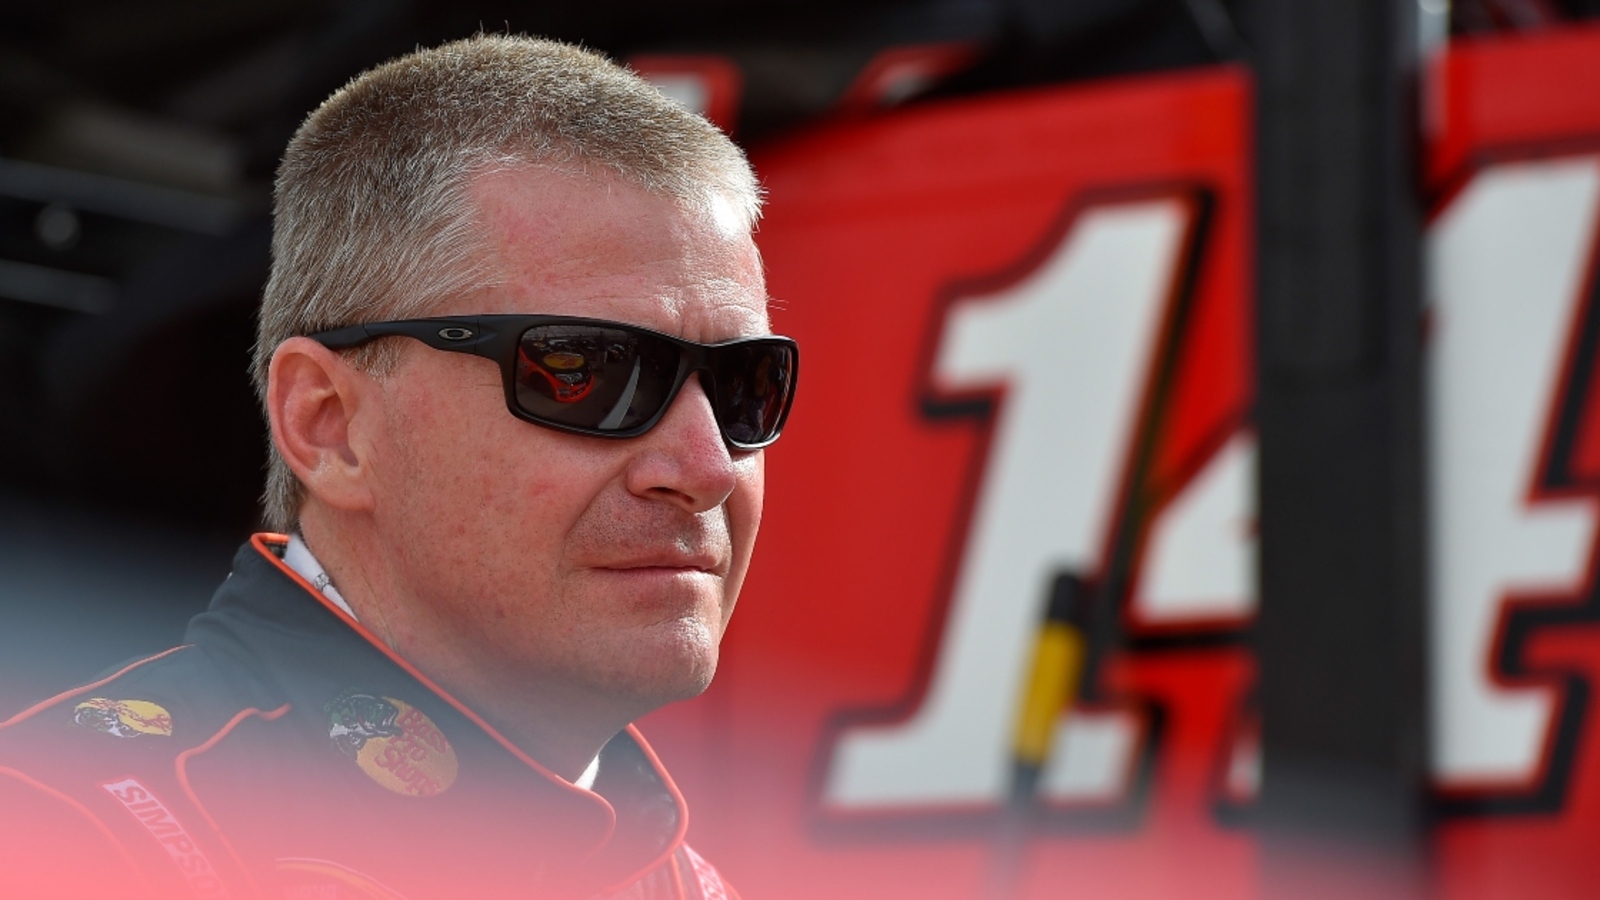 Jeff Burton doesn’t expect repeat of Bristol tire situation at Richmond Raceway